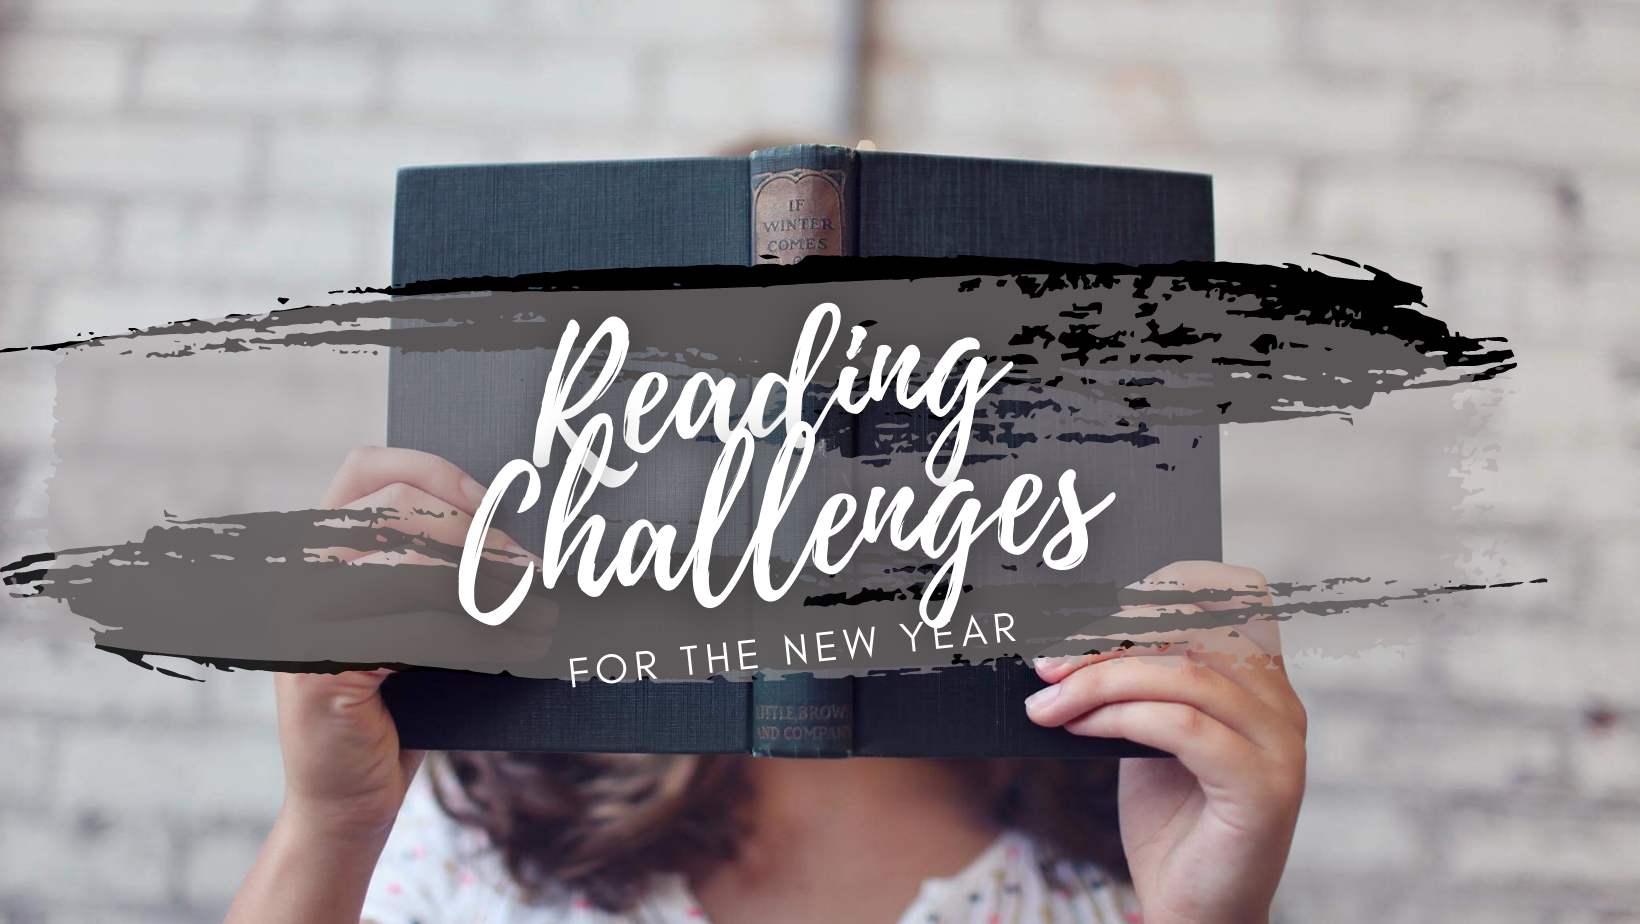 Reading Challenges for the new year